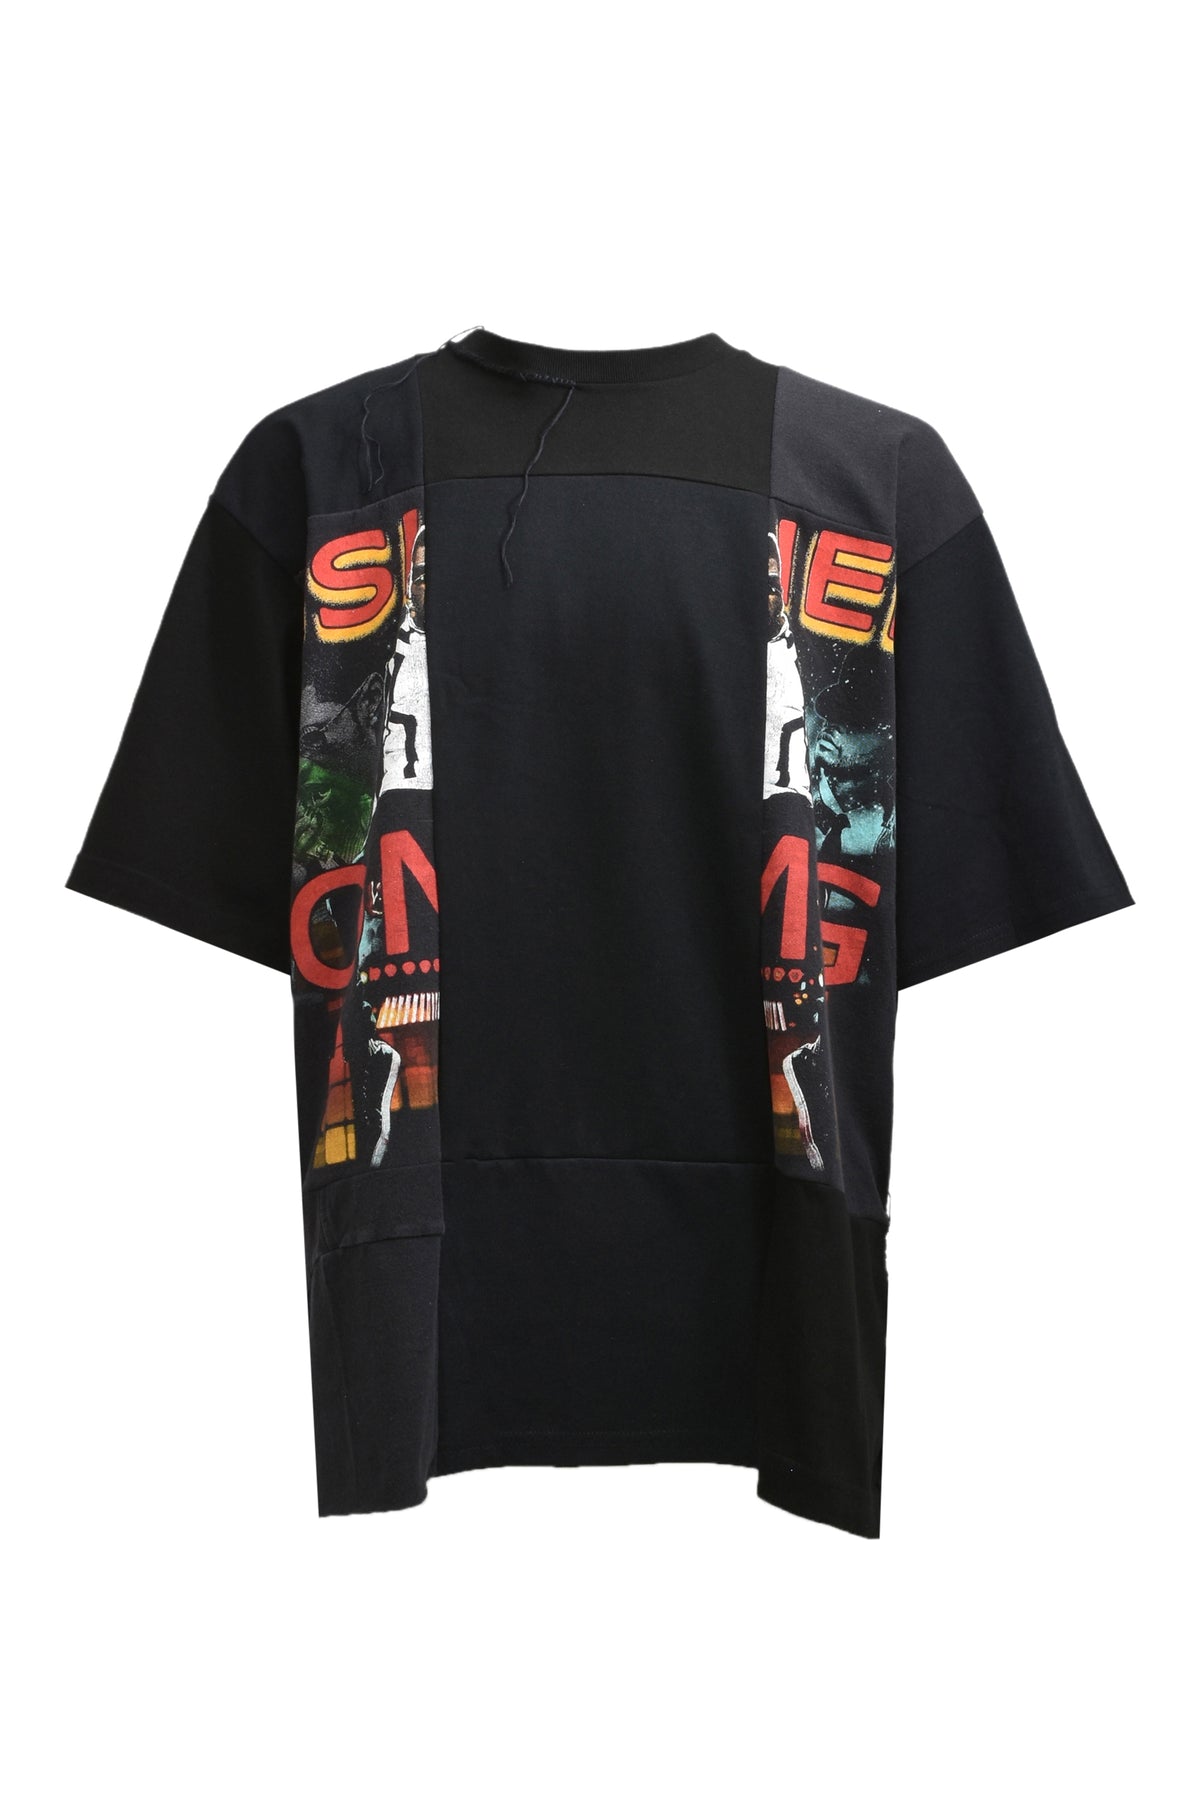 RE: PATCH WORK SS TEE L /  BLK